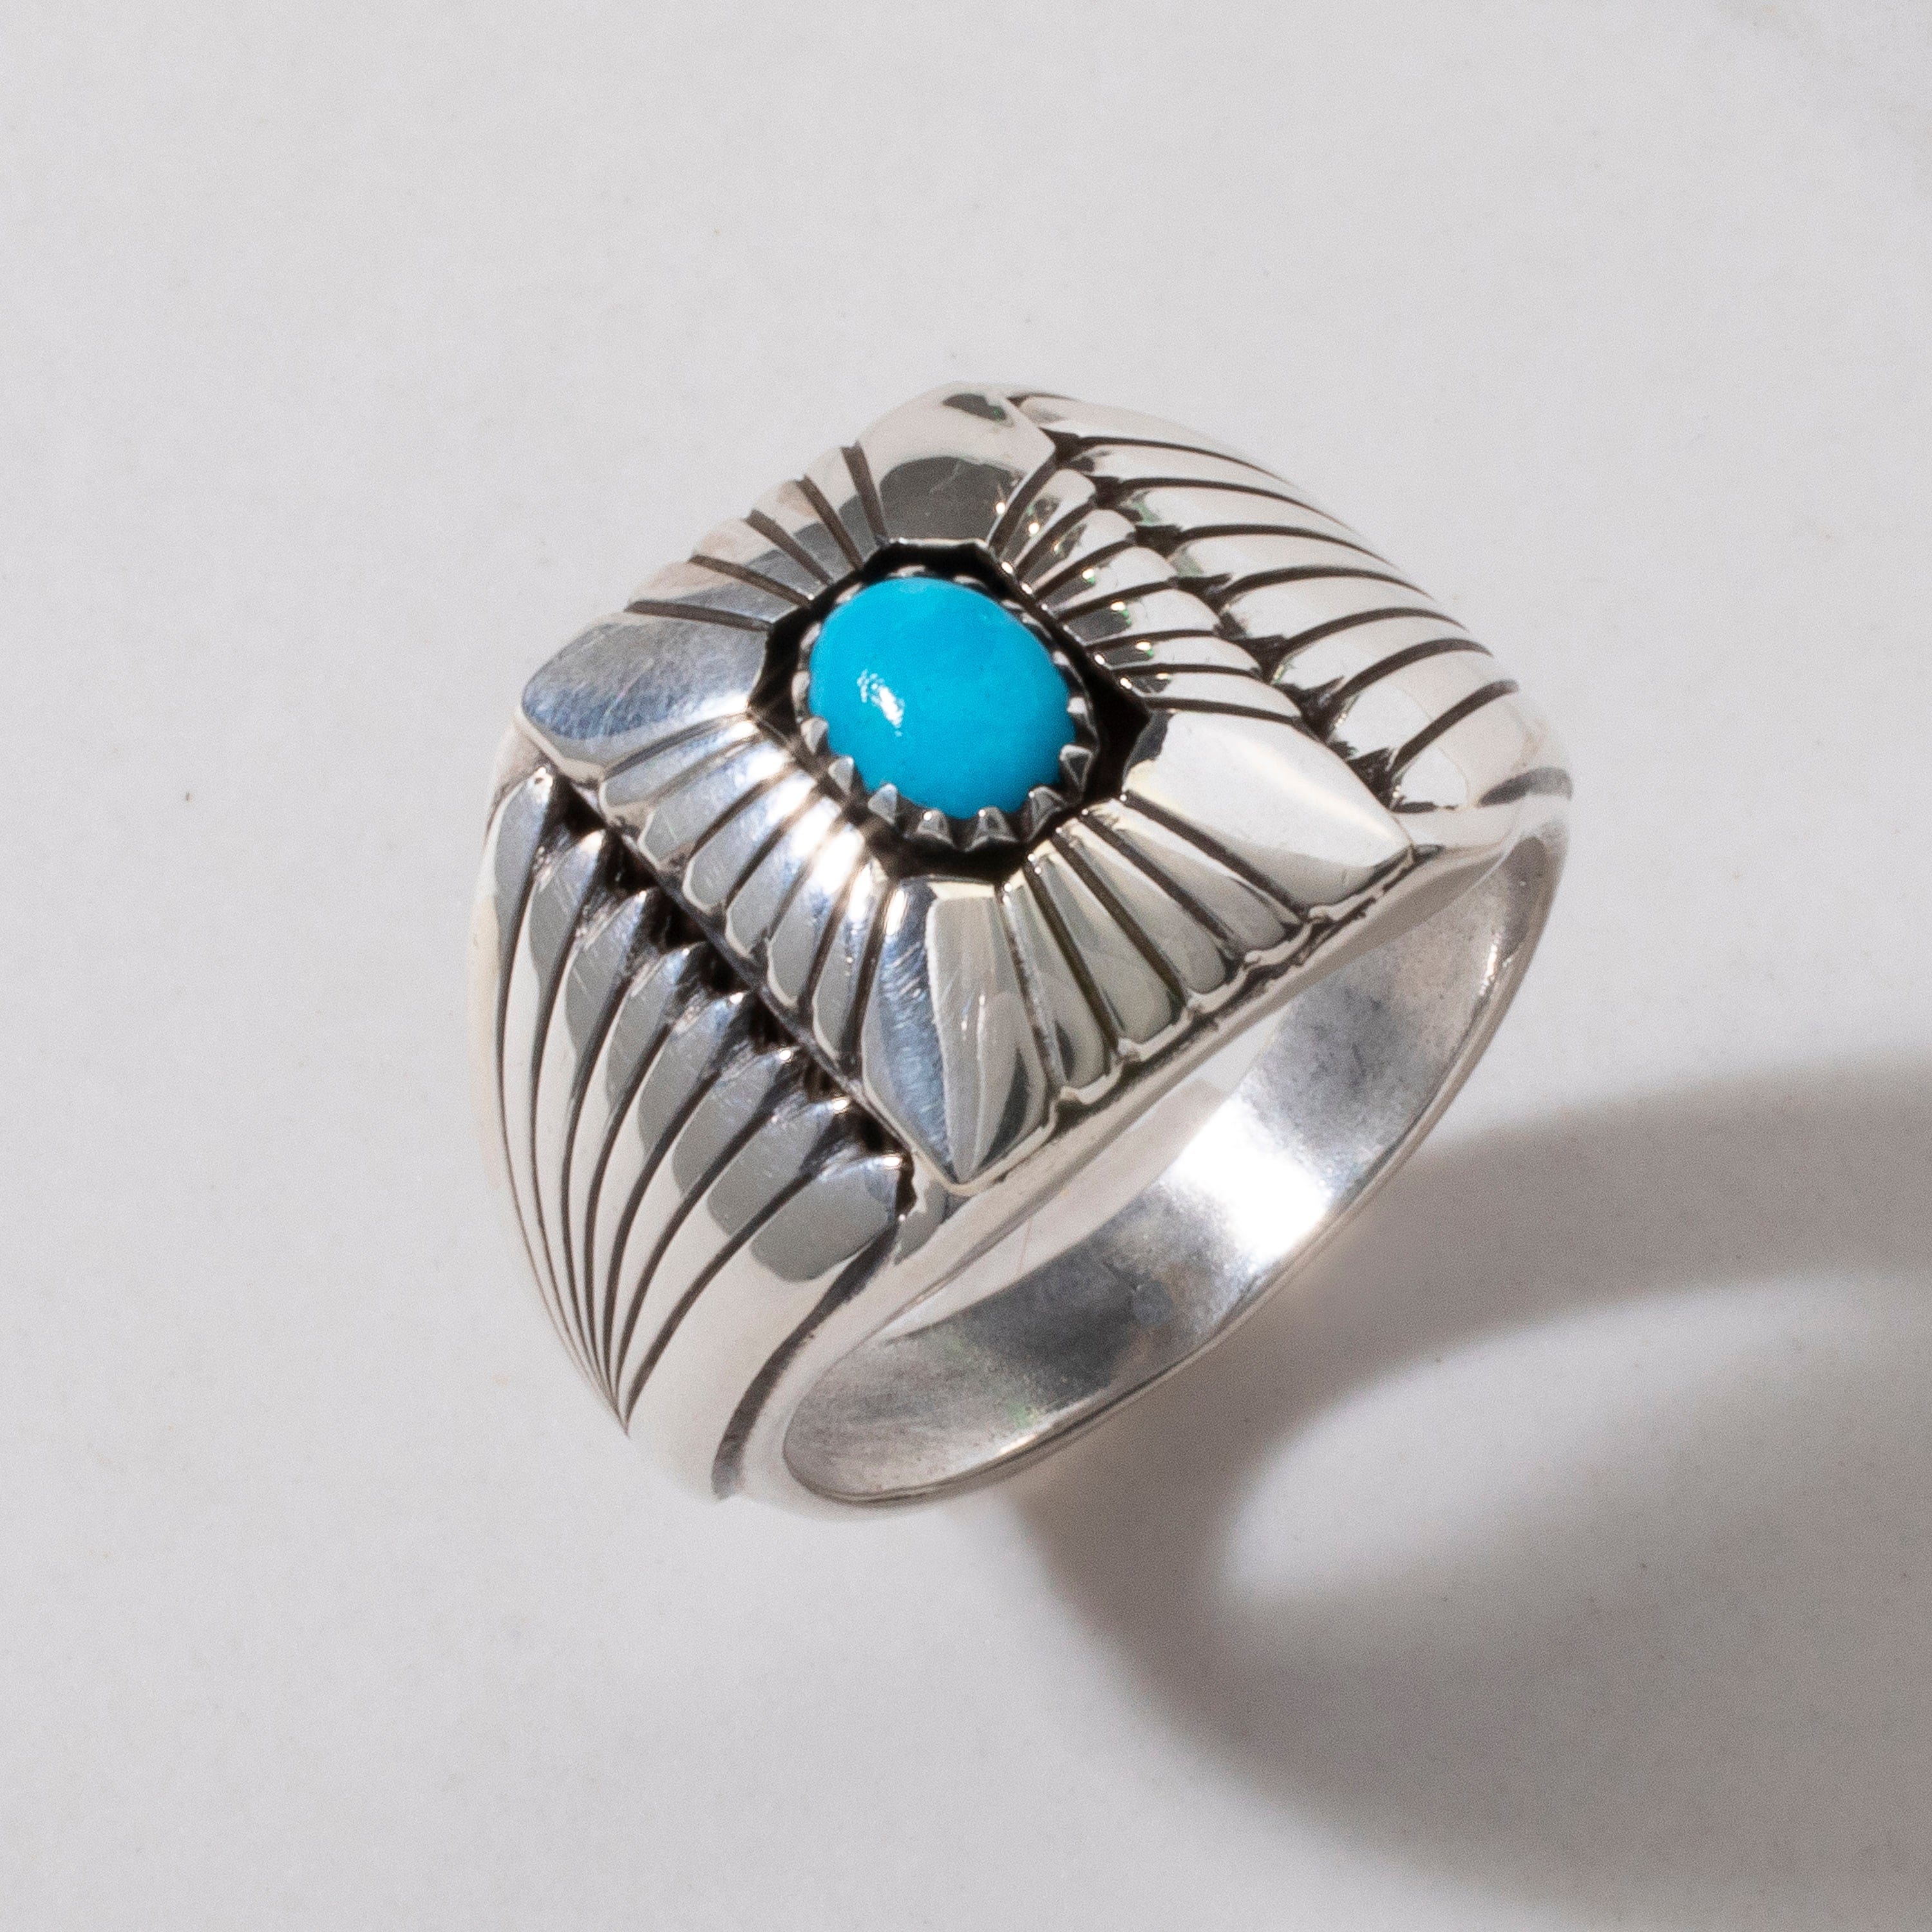 Kalifano Native American Jewelry Sleeping Beauty Turquoise Navajo USA Native American Made 925 Sterling Silver Ring